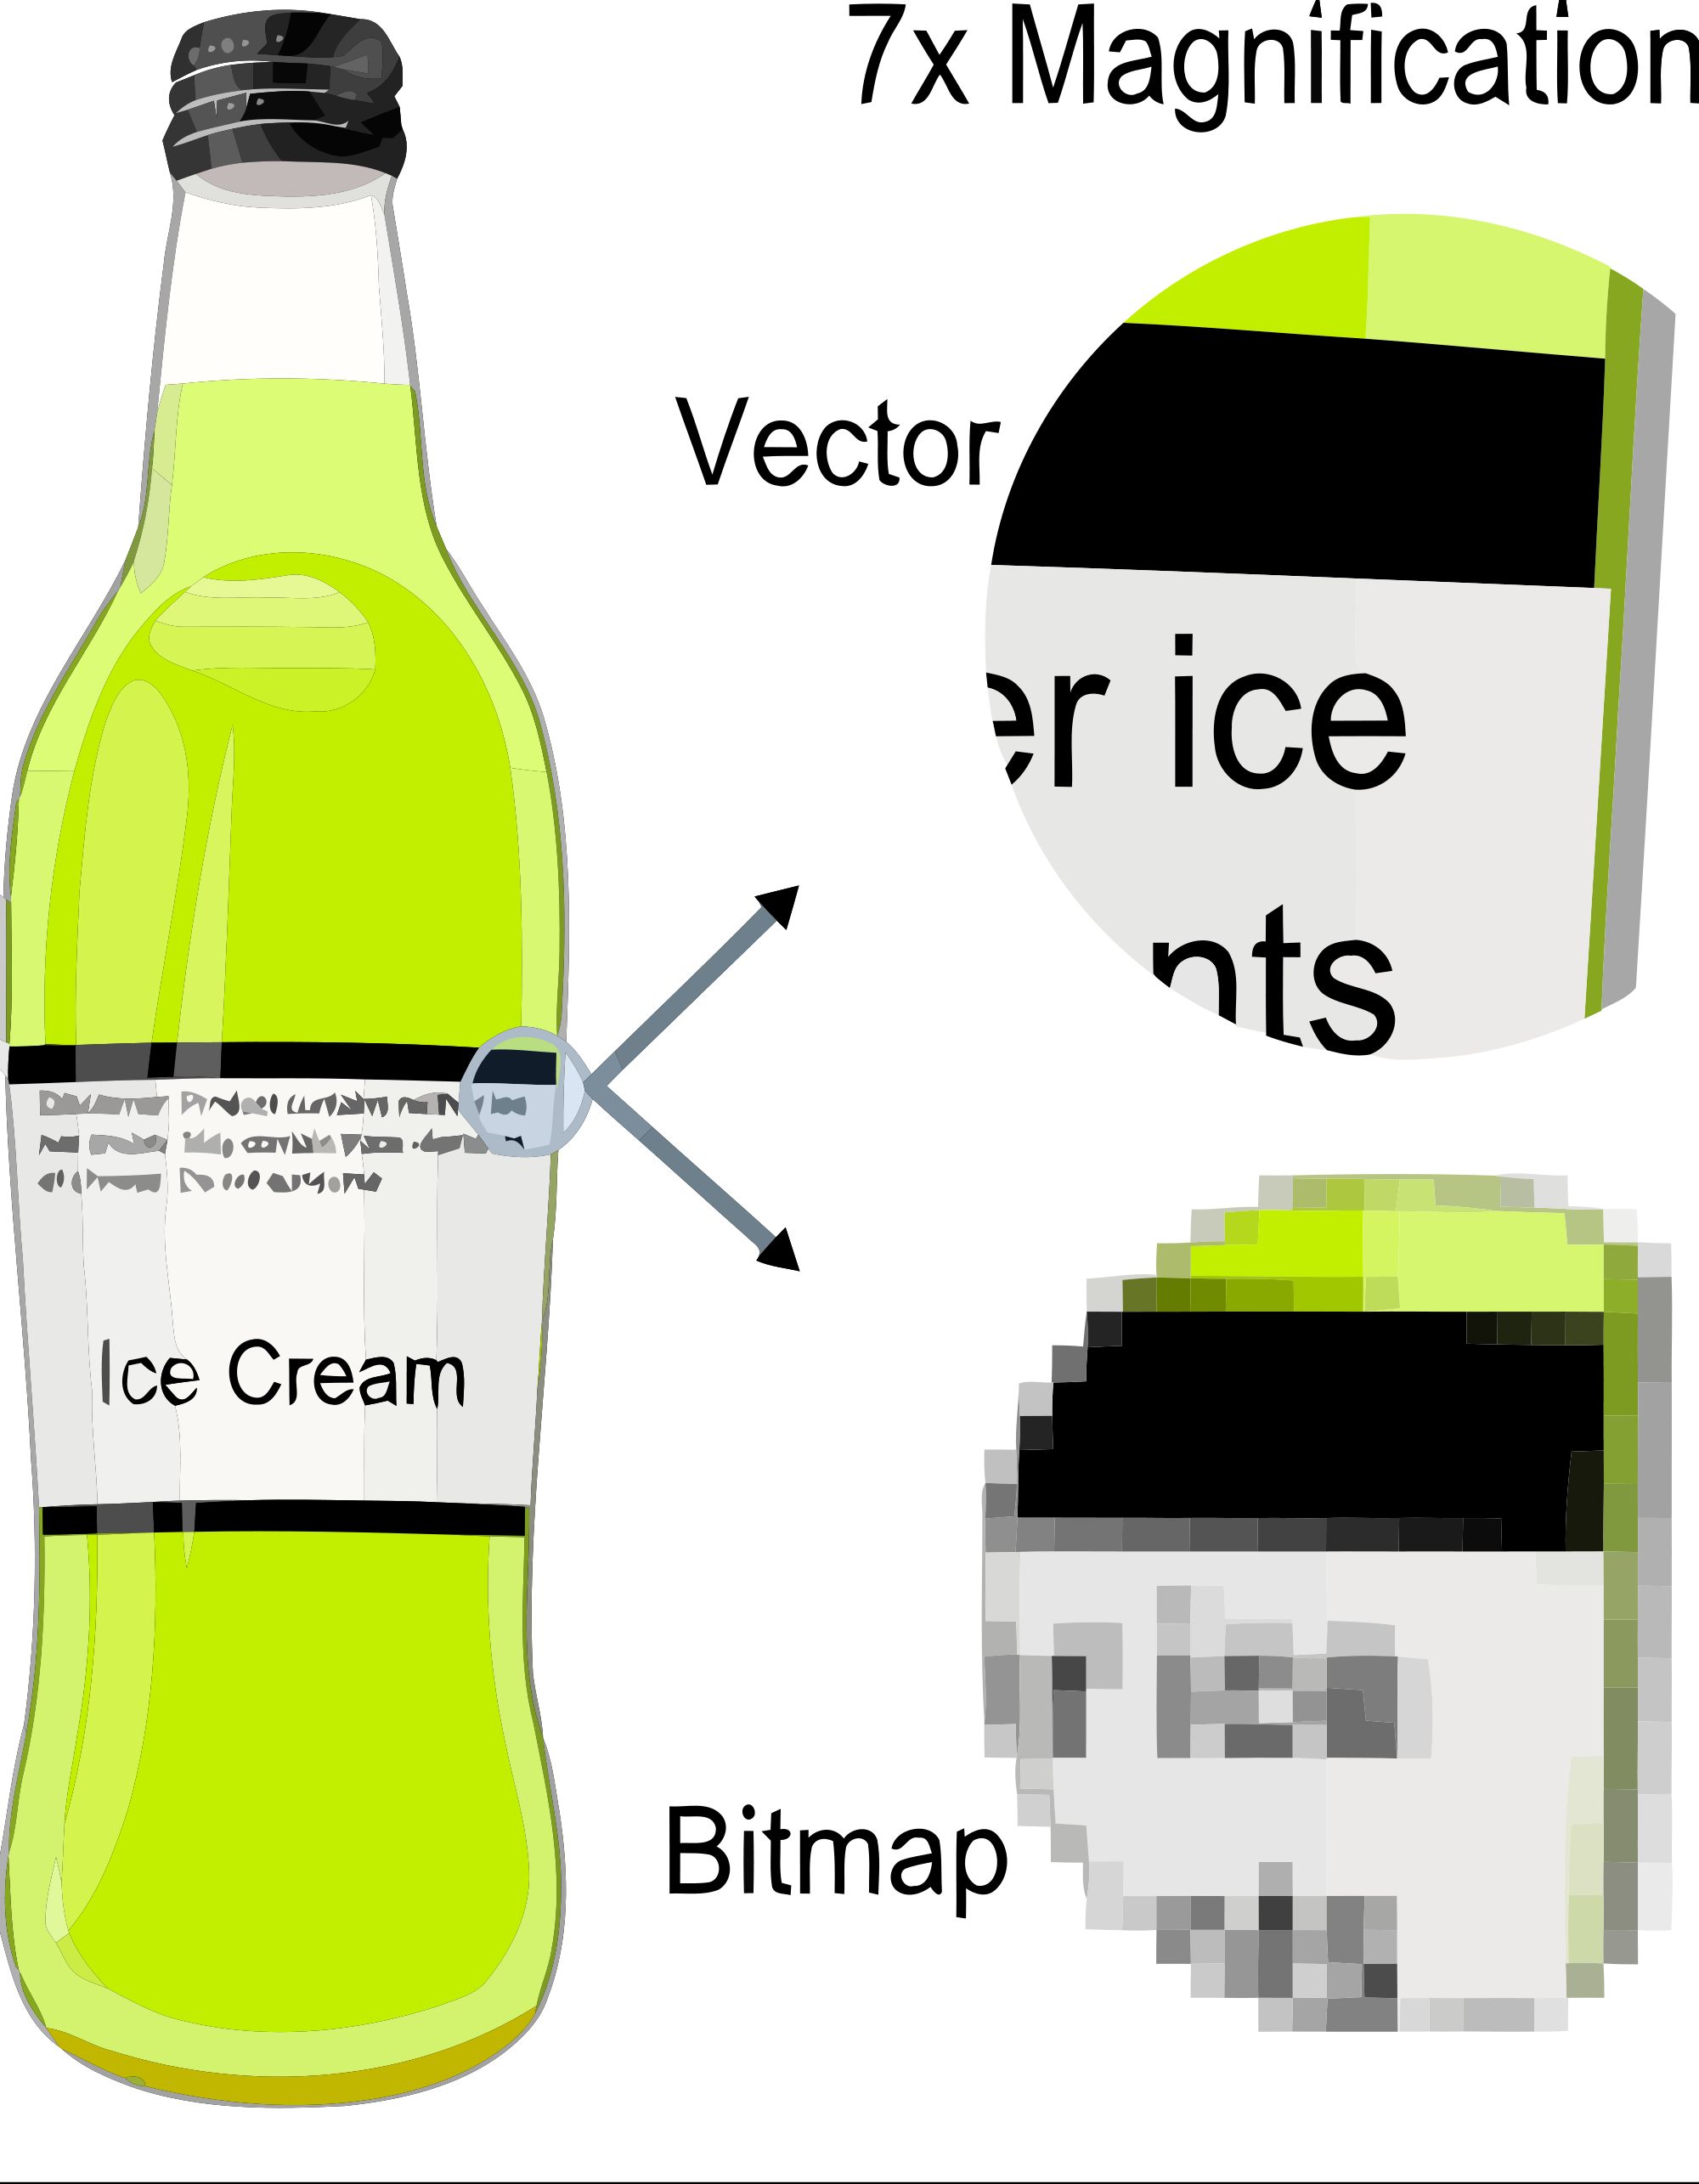 Example showing effect of vector graphics versus raster graphics. The original vector-based illustration is at the left. The upper-right image illustrates magnification of 7x as a vector image. The lower-right image illustrates the same magnification as a raster (bitmap) image. Raster images are based on pixels and thus scale with loss of clarity, while vector-based images can be scaled indefinitely without loss of quality. 